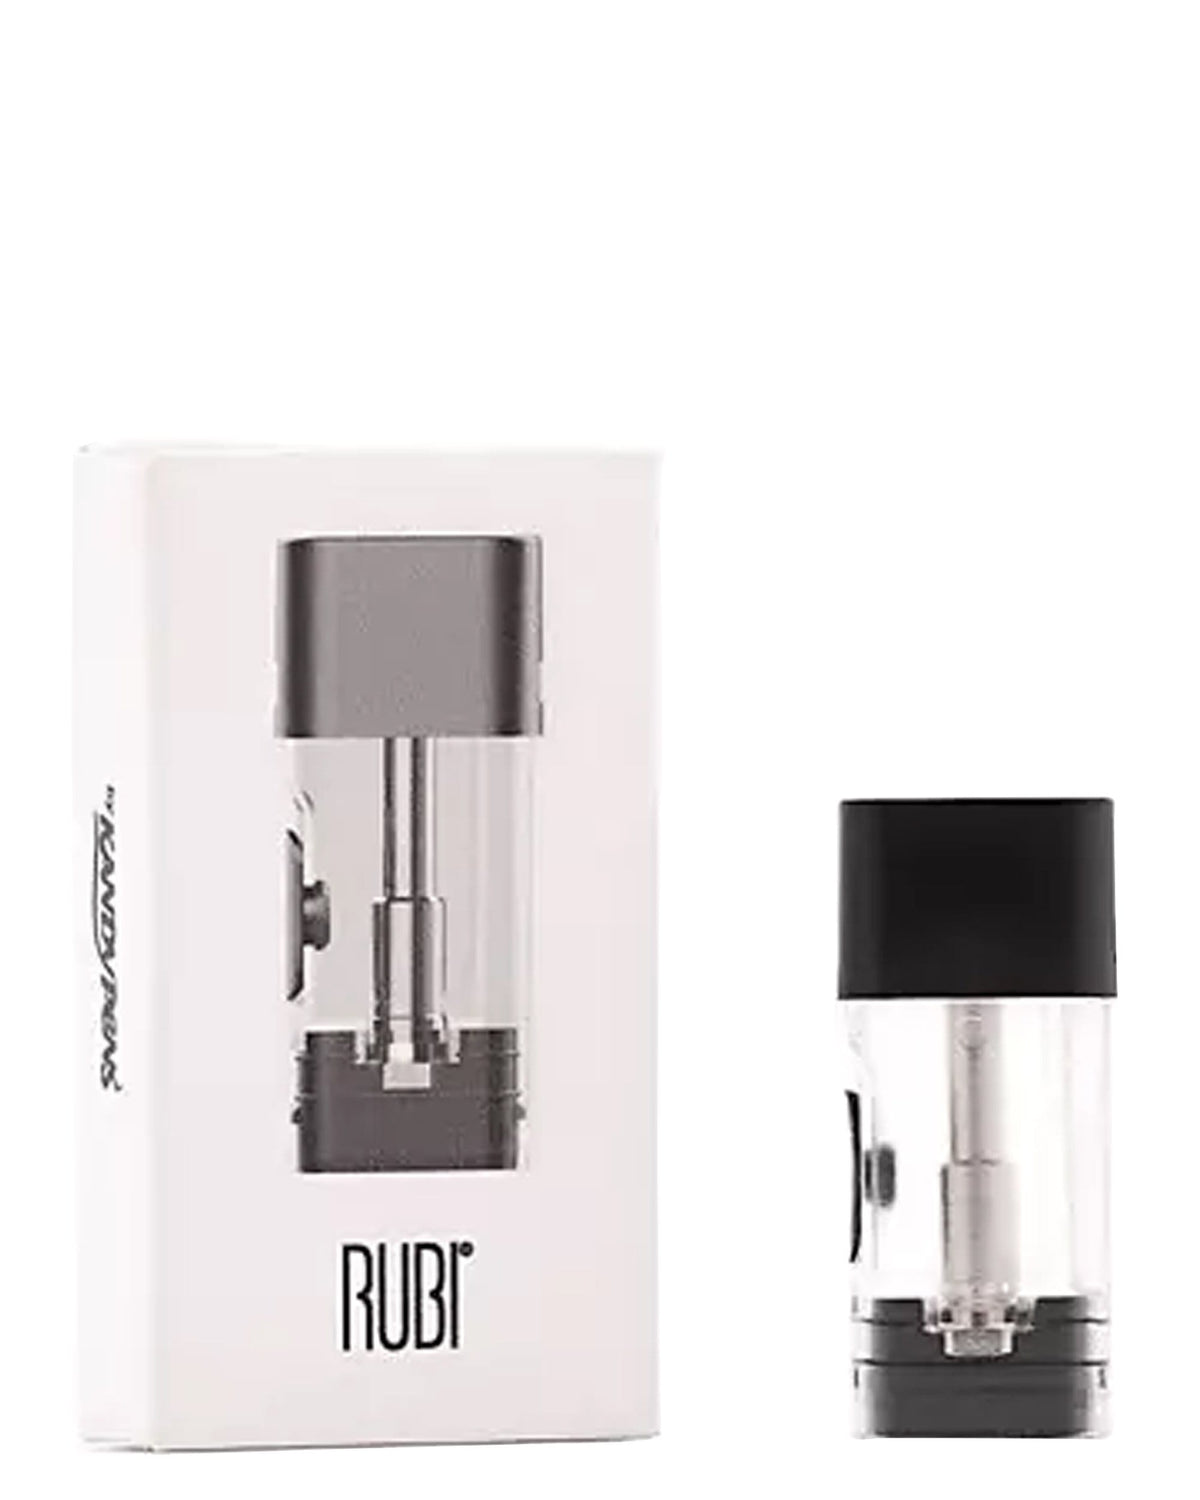 KandyPens Slim Vaporizer - With a Refillable Cartridge - Worlds Pipe